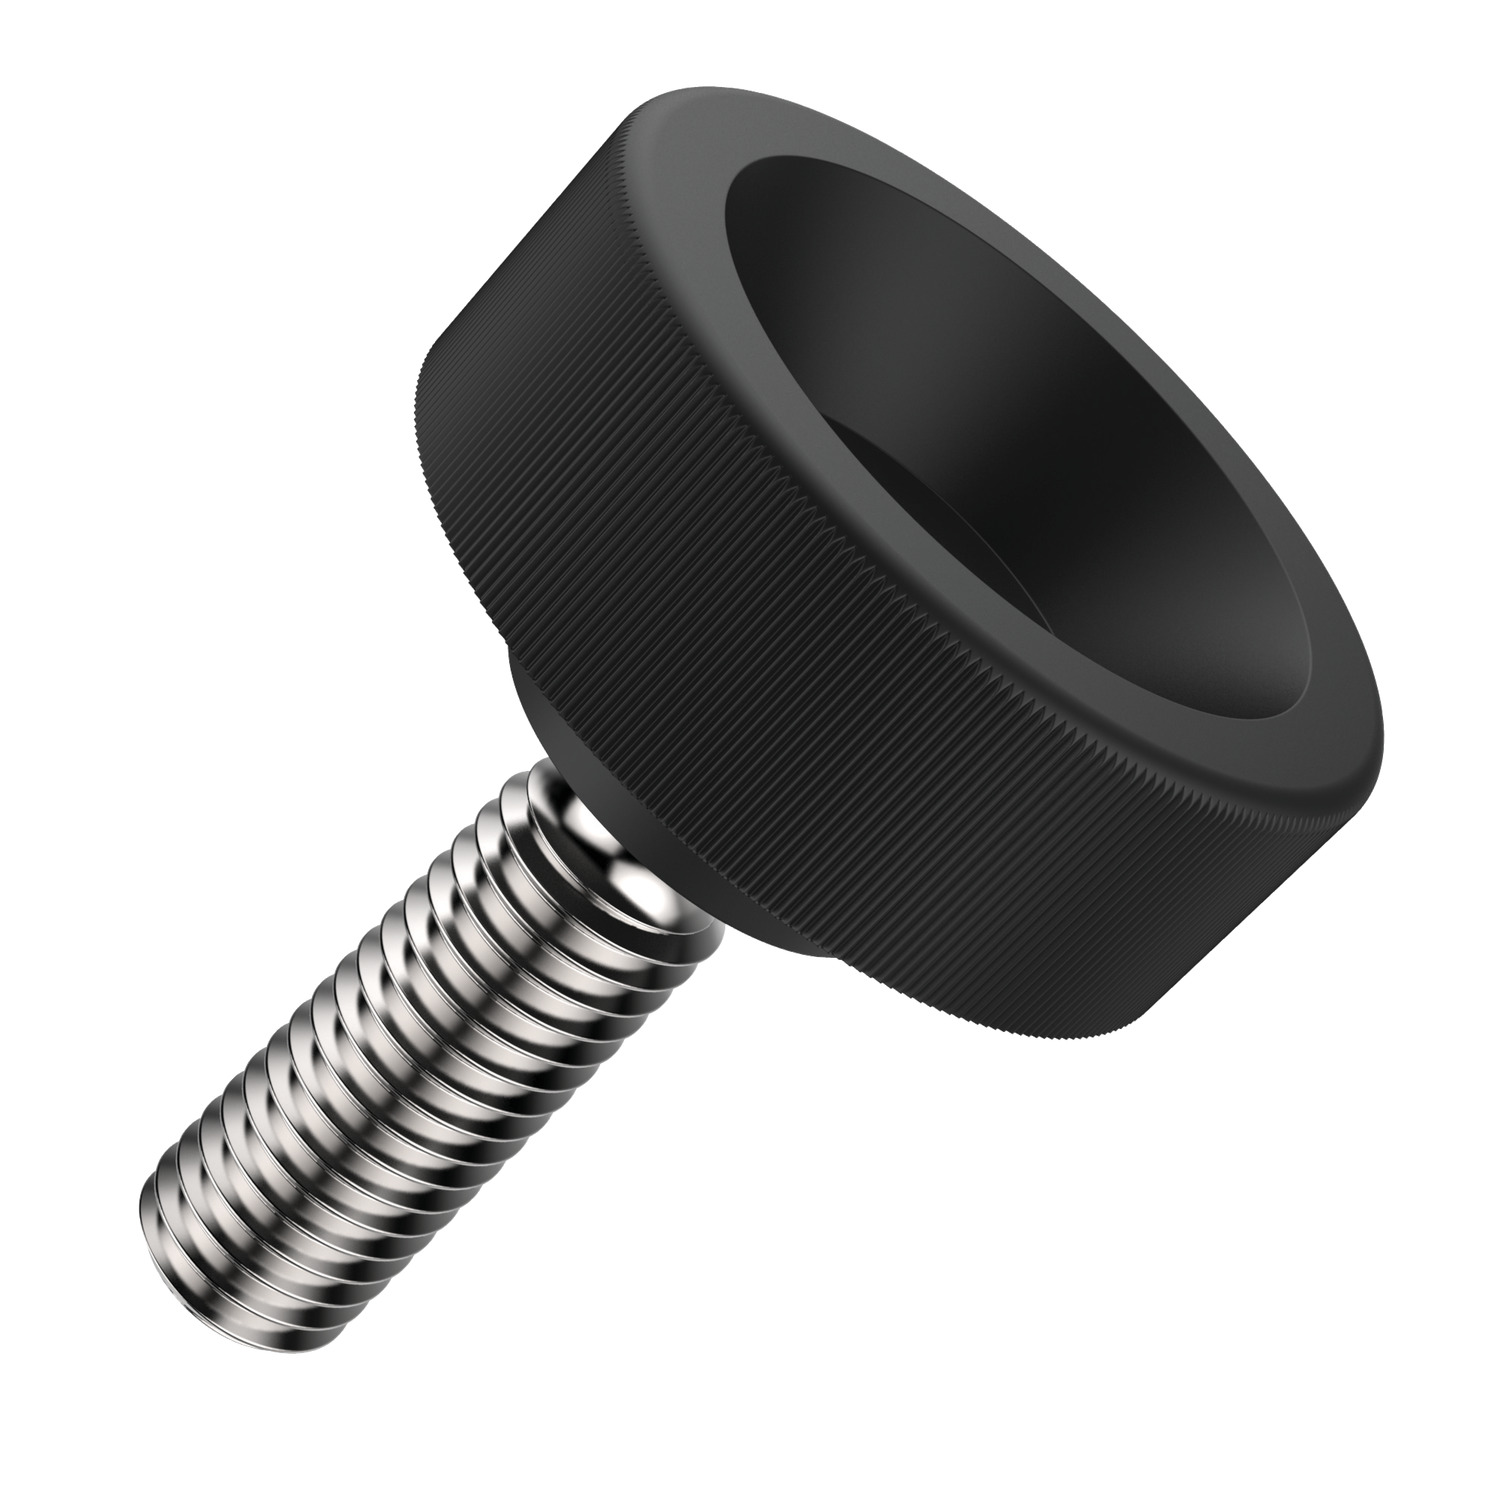 Knurled Thumb Screws Plastic head thumb screws manufactured from high impact resistant thermoplastic. Suitable for a wide range of industries.